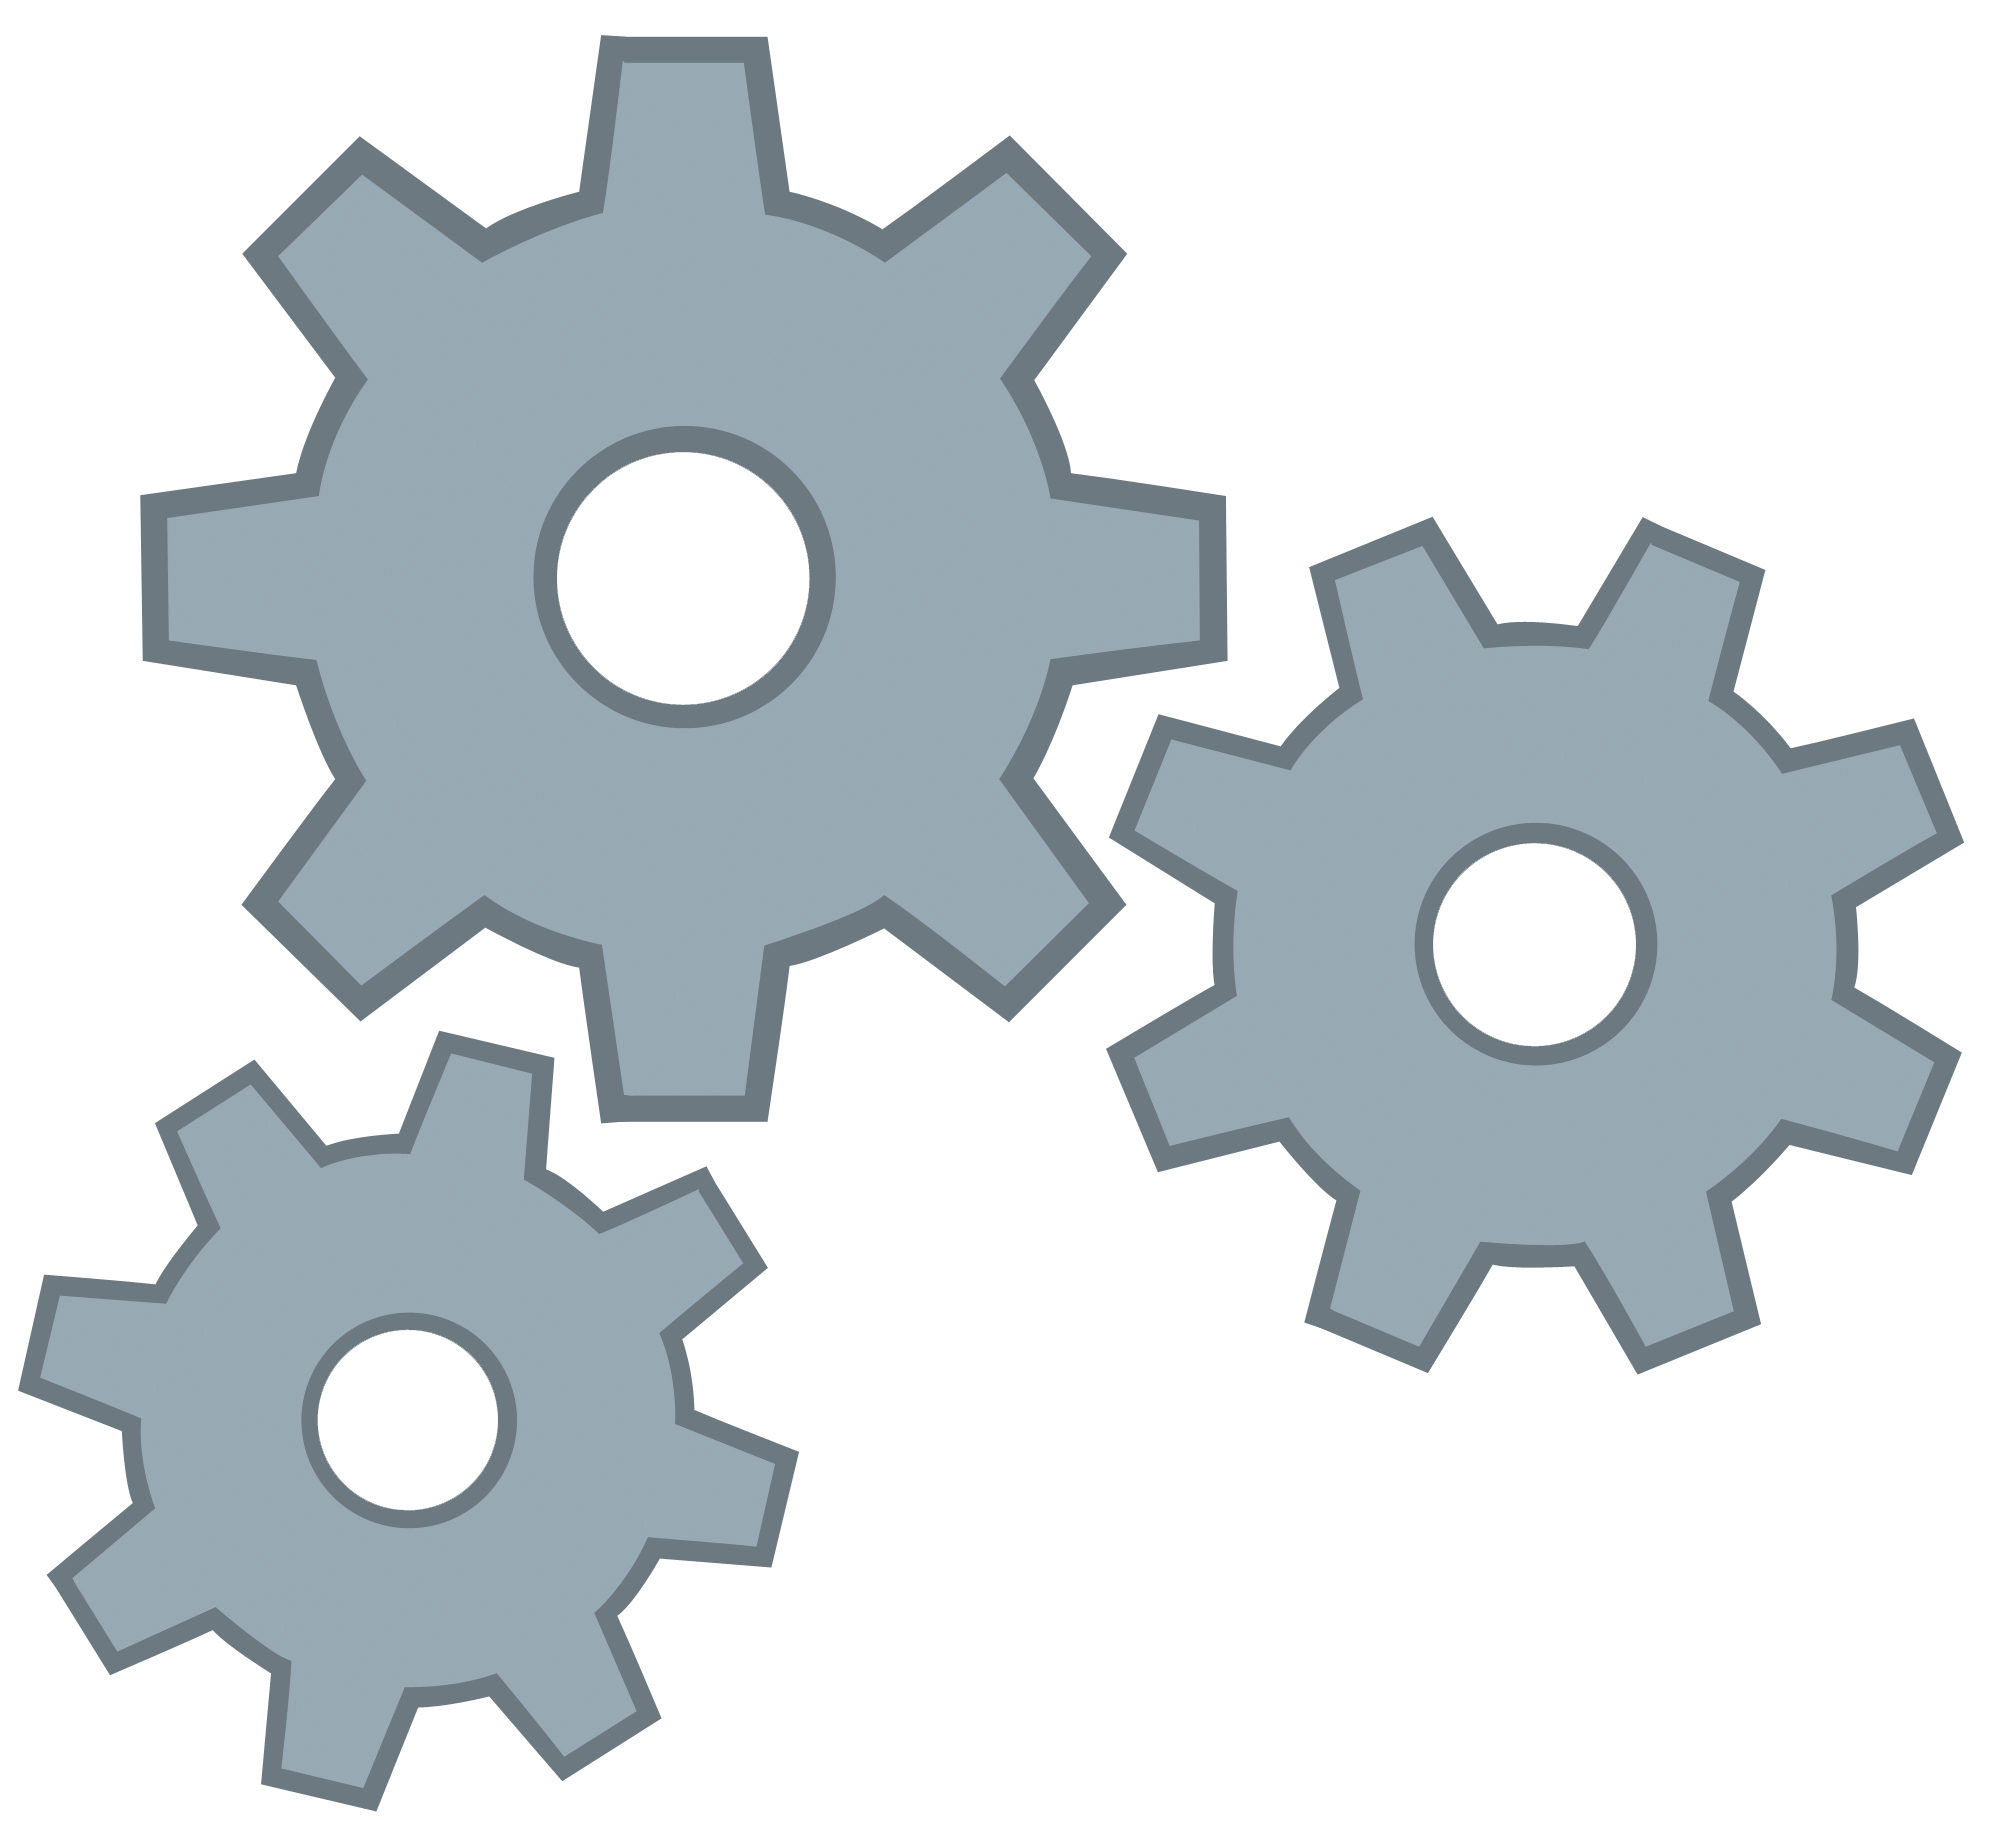 Gears Clipart No Background Clip Art Library